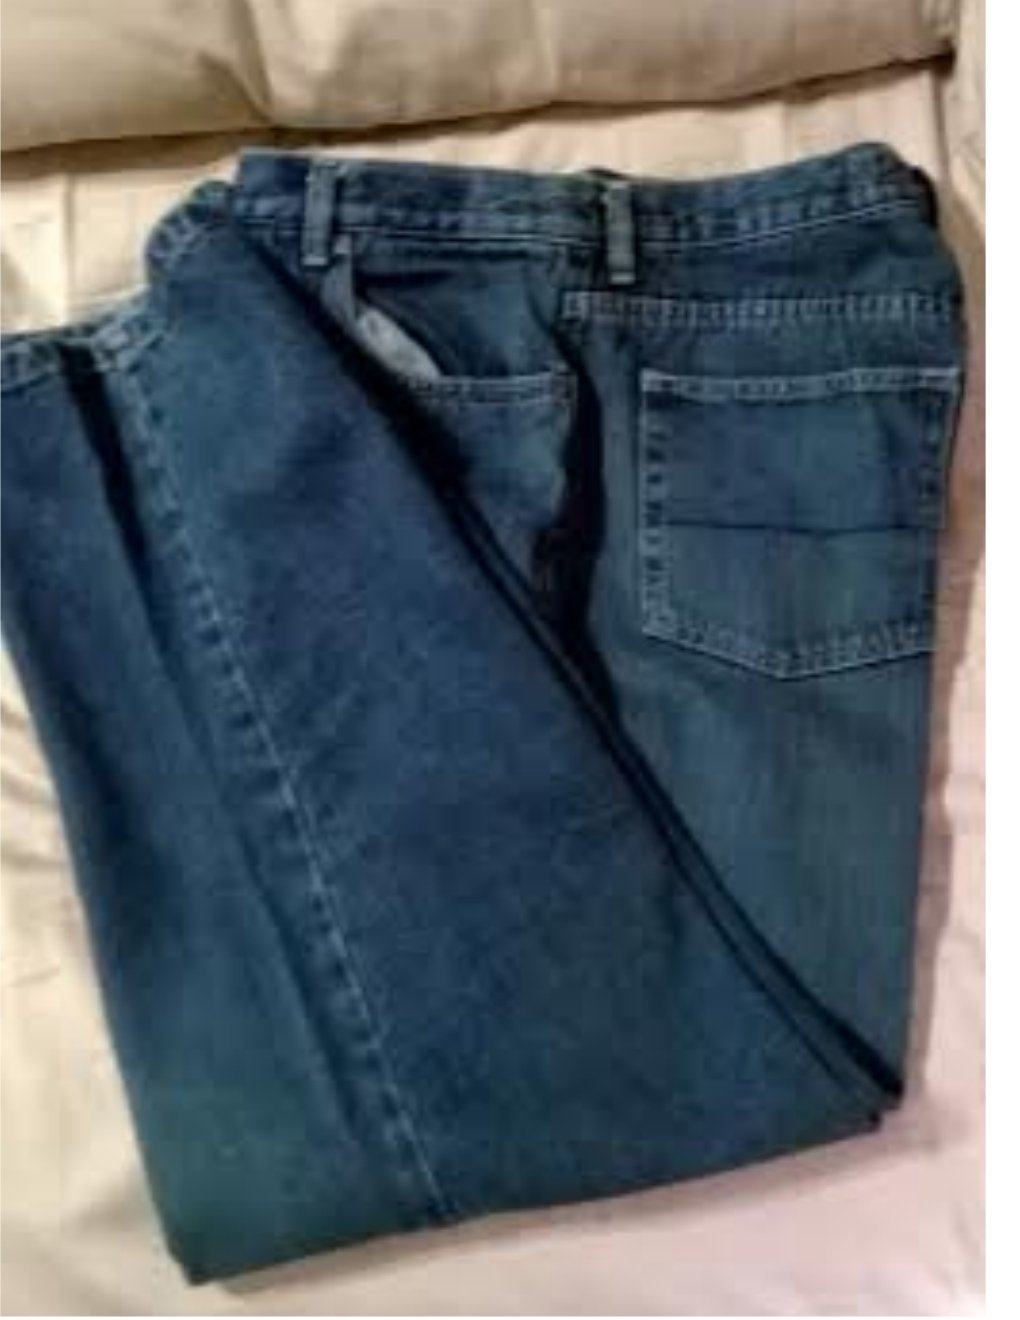 Nautica Relaxed Fit Denim Blue Jeans NS83-J-Class 34 x 30 Size Pre-Owned